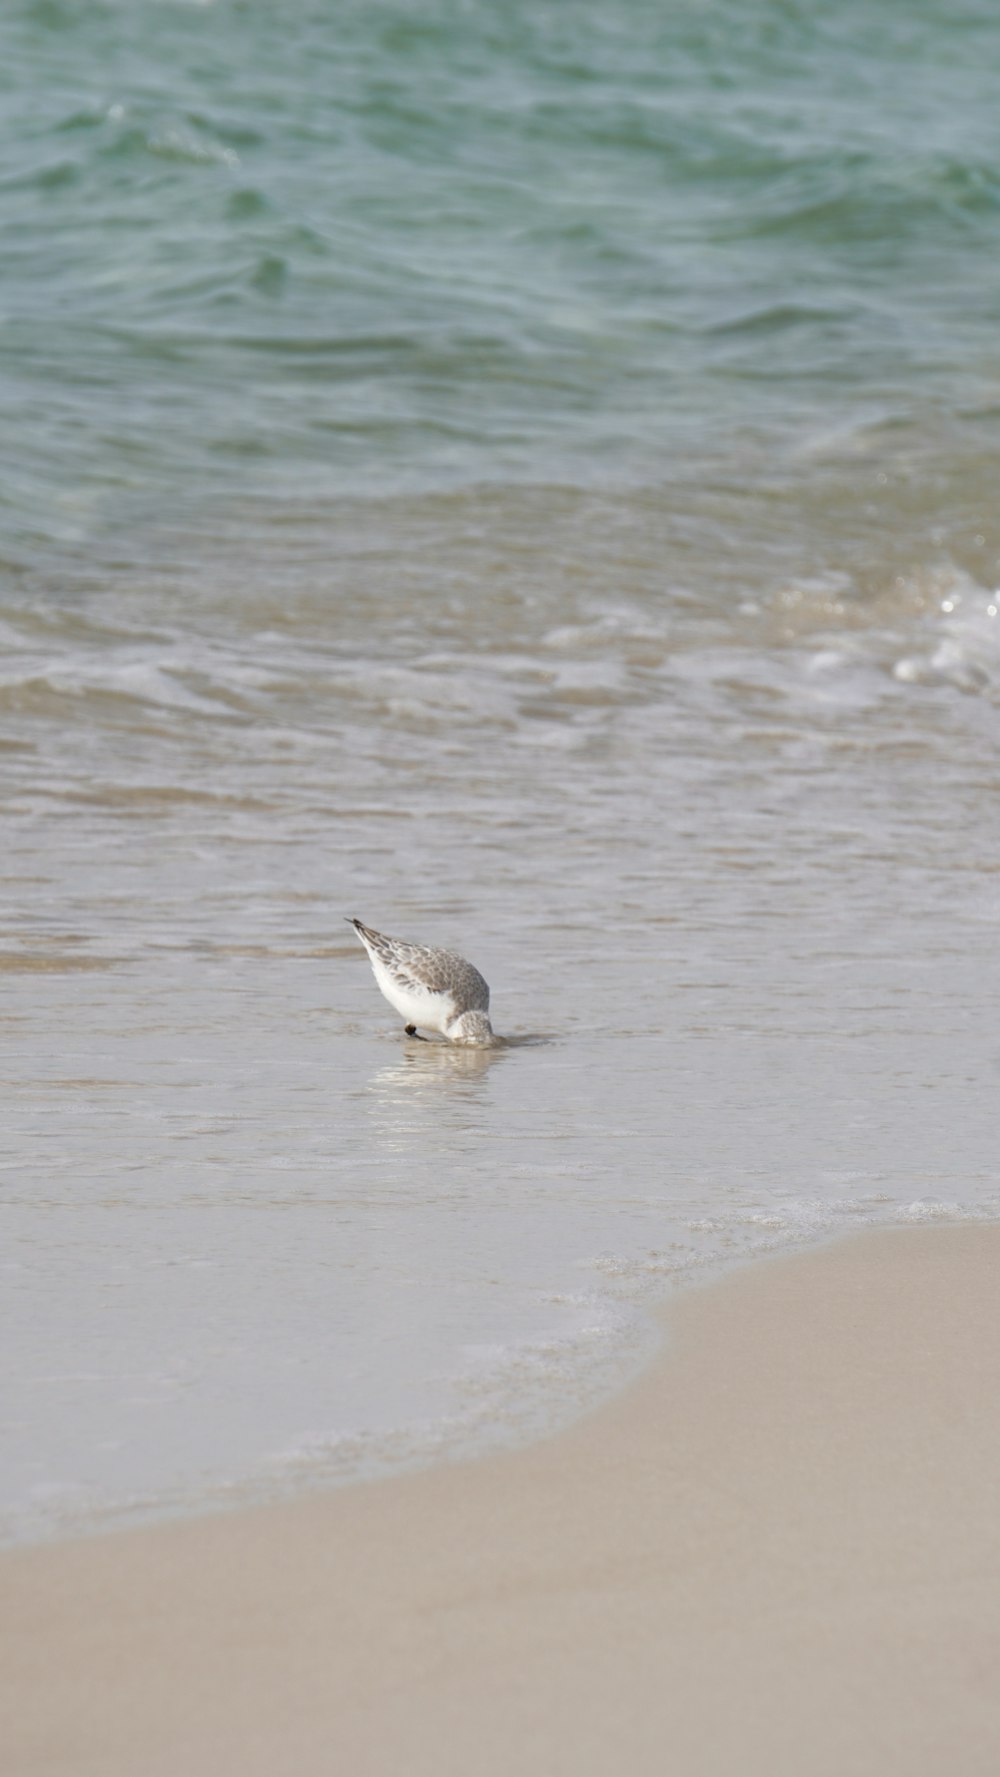 a bird is standing in the water at the beach